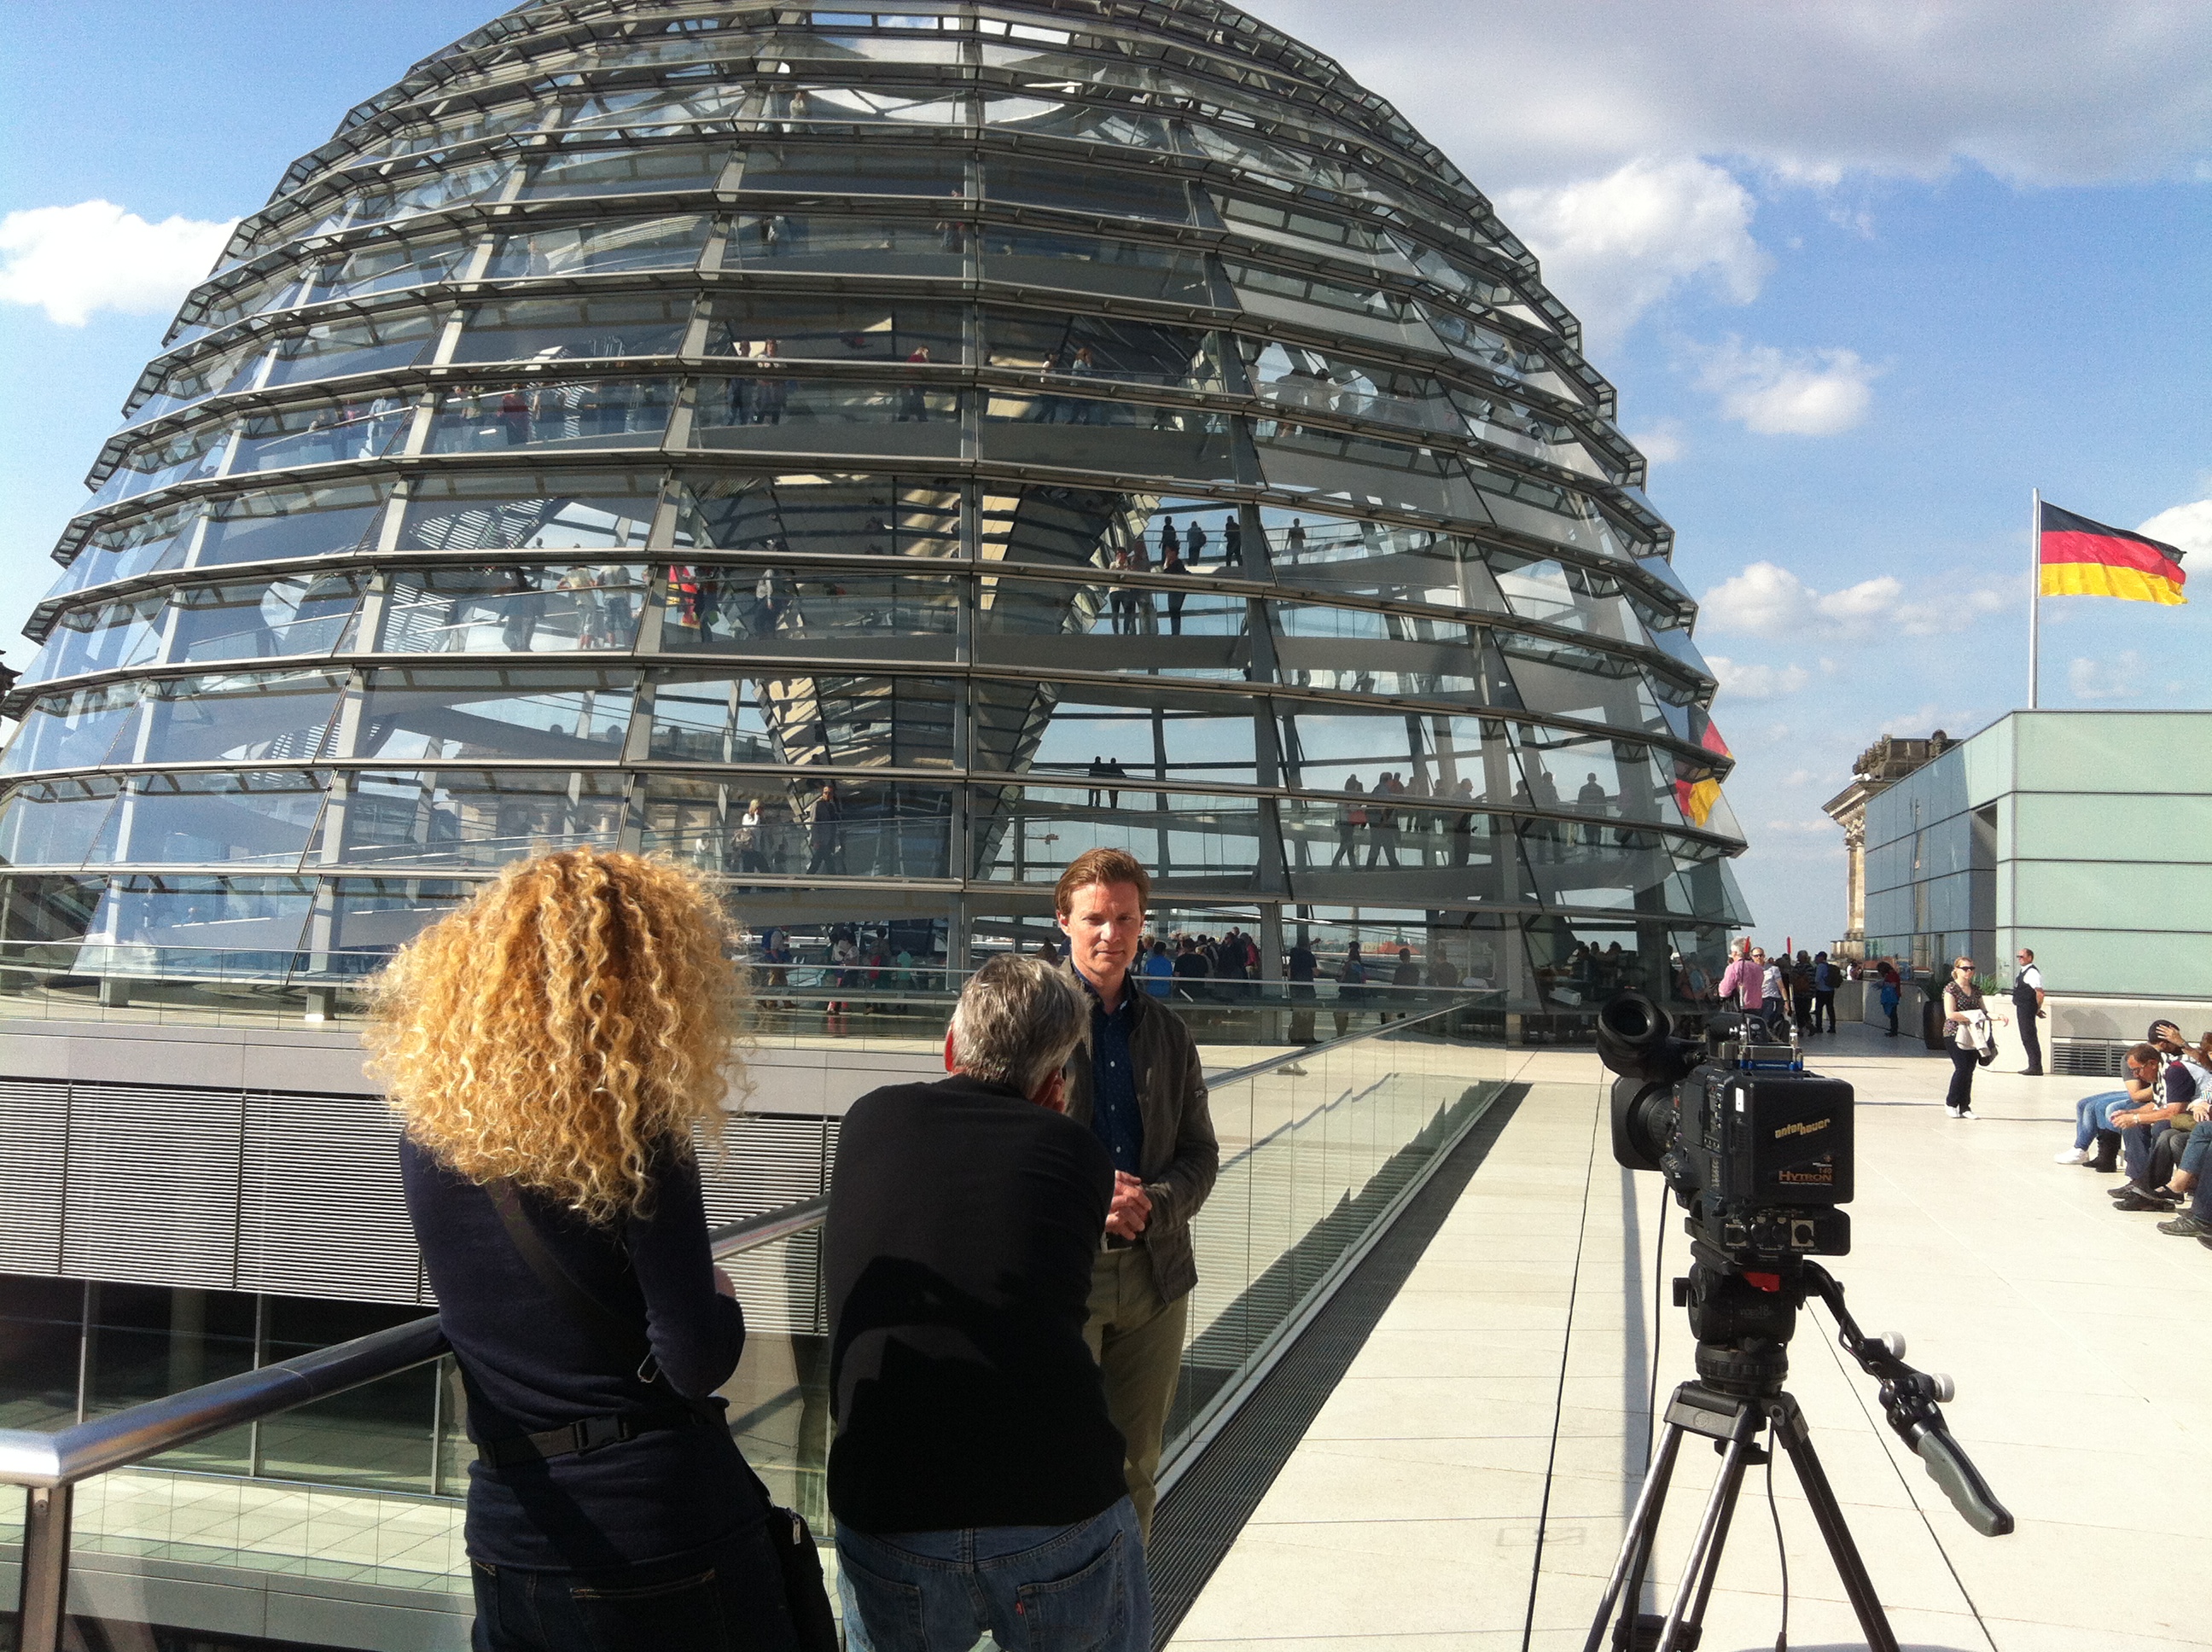 Filming with PBS crew on top of the Reichstag/German Parliament Building in 2014